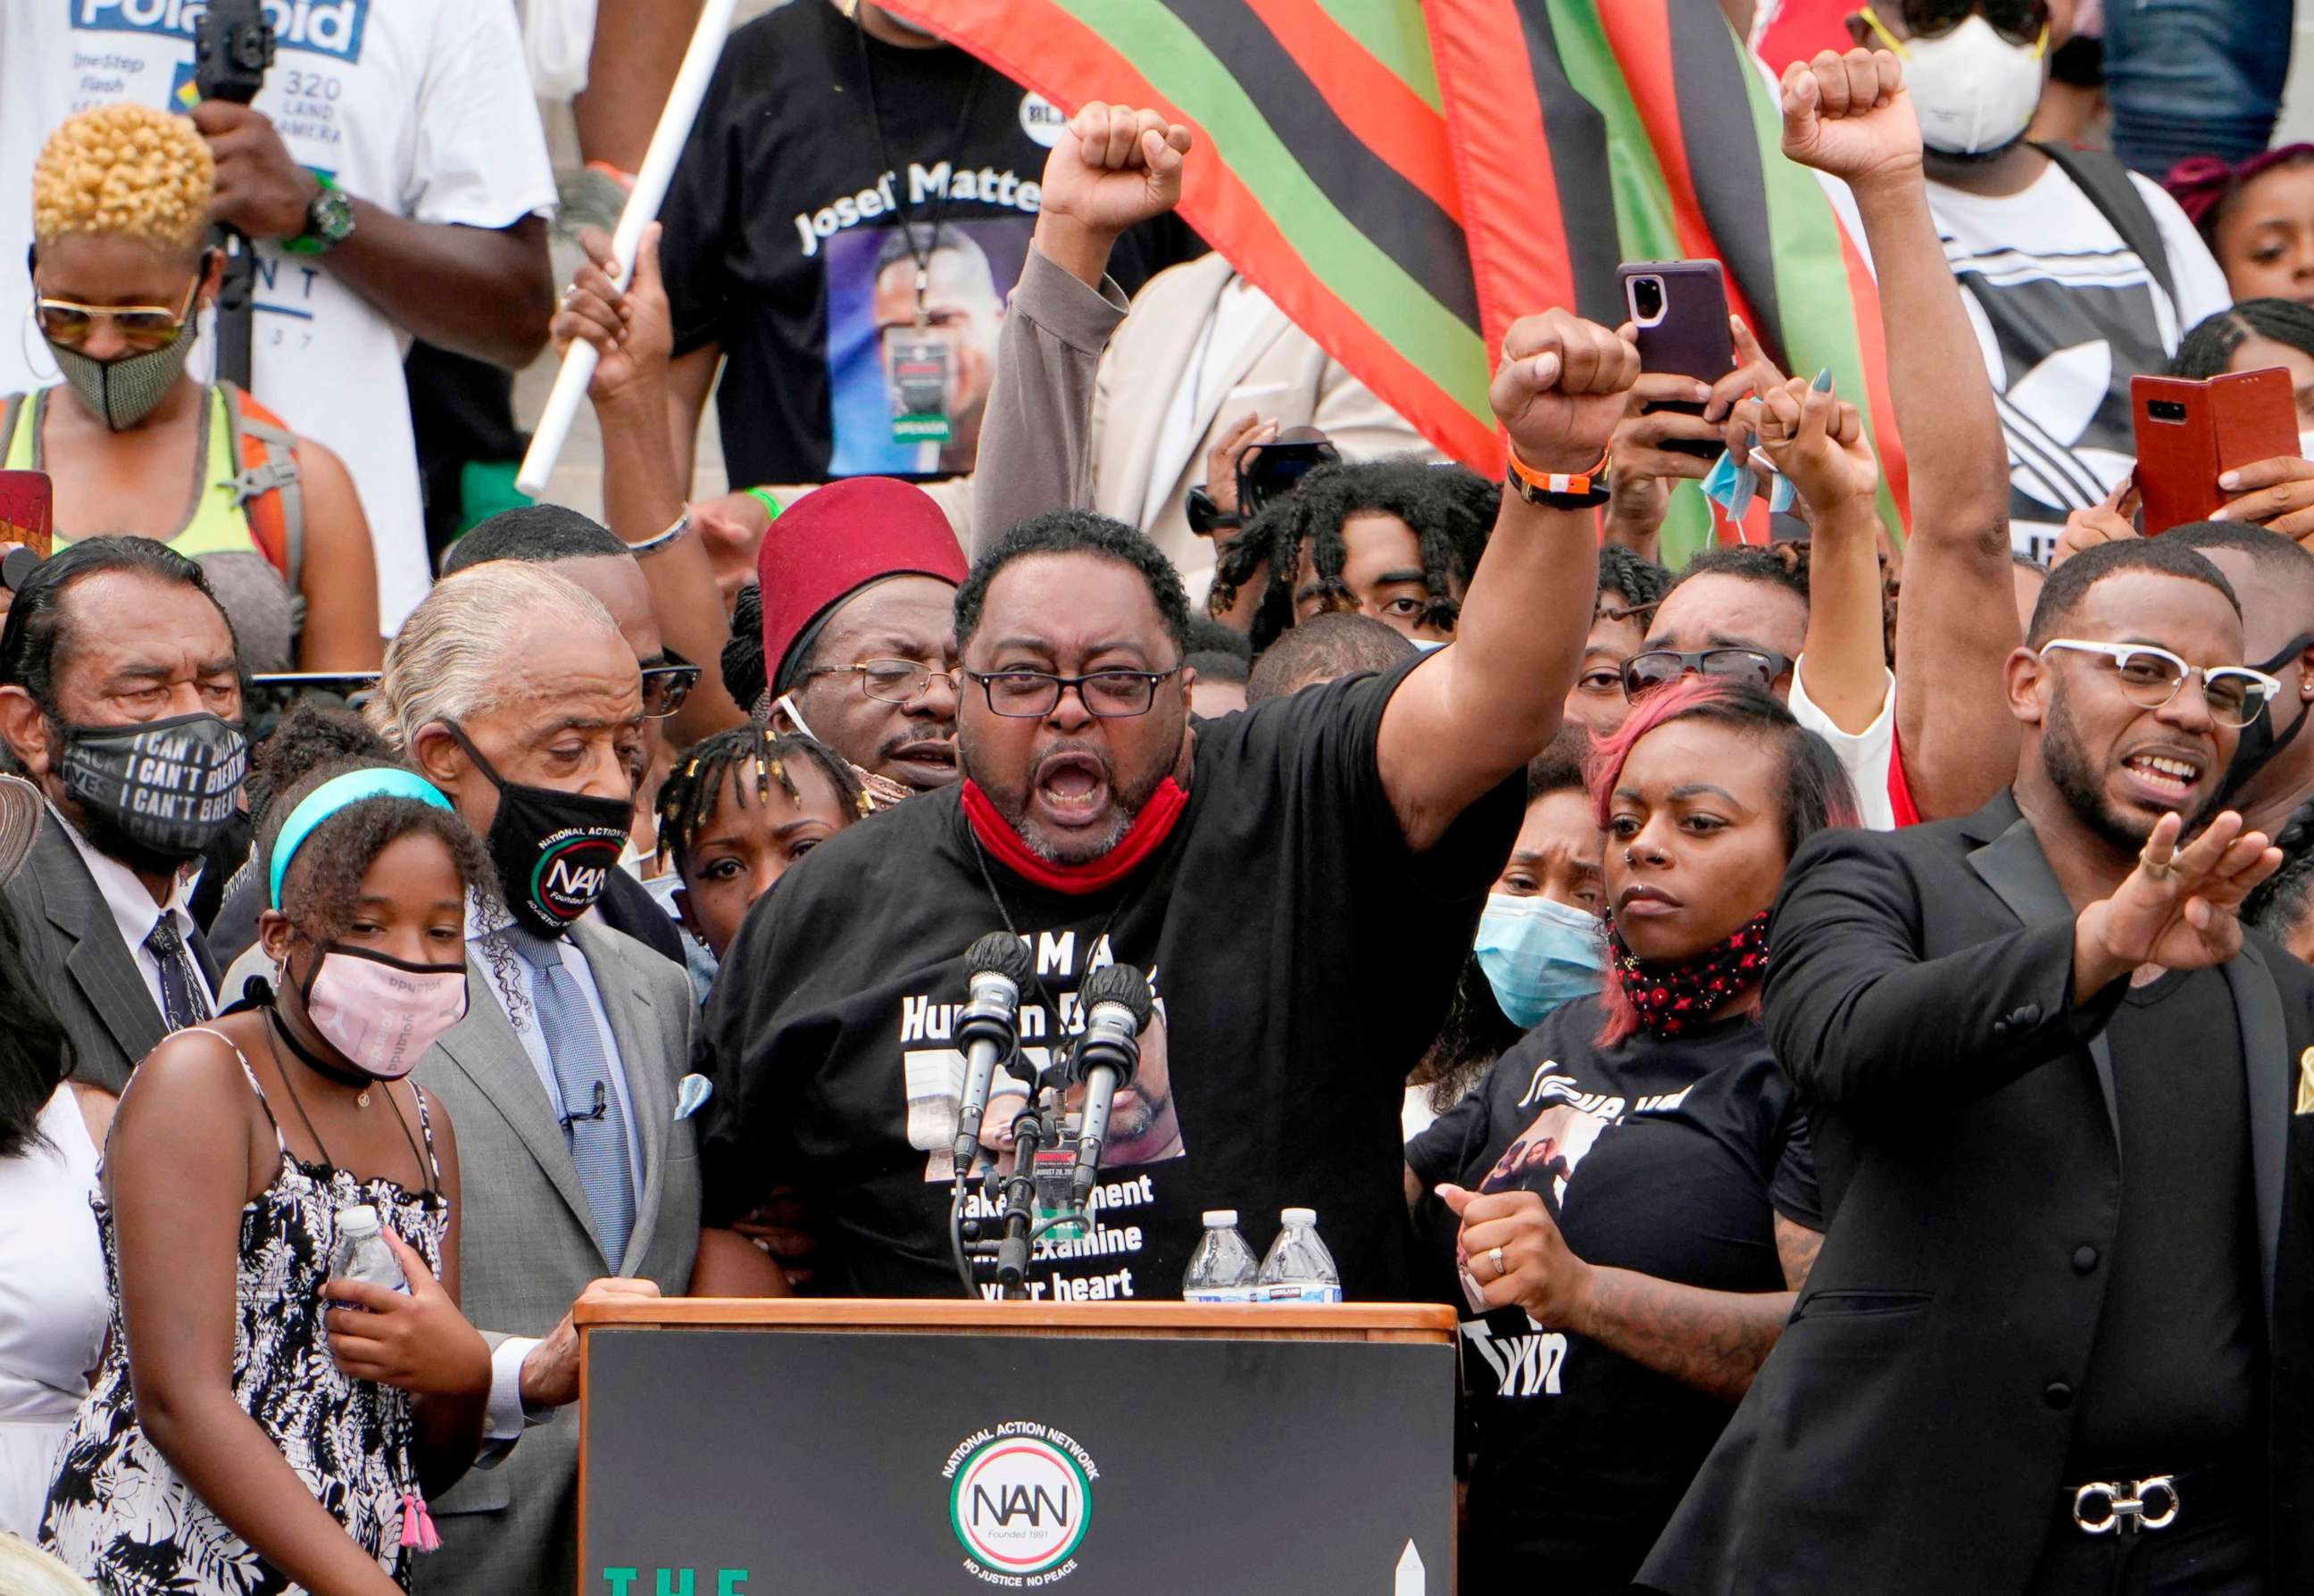 PHOTO: Jacob Blake Sr., father of Jacob Blake, Jr., speaks at the Lincoln Memorial during the "Commitment March: Get Your Knee Off Our Necks" protest against racism and police brutality, Aug. 28, 2020, in Washington D.C.